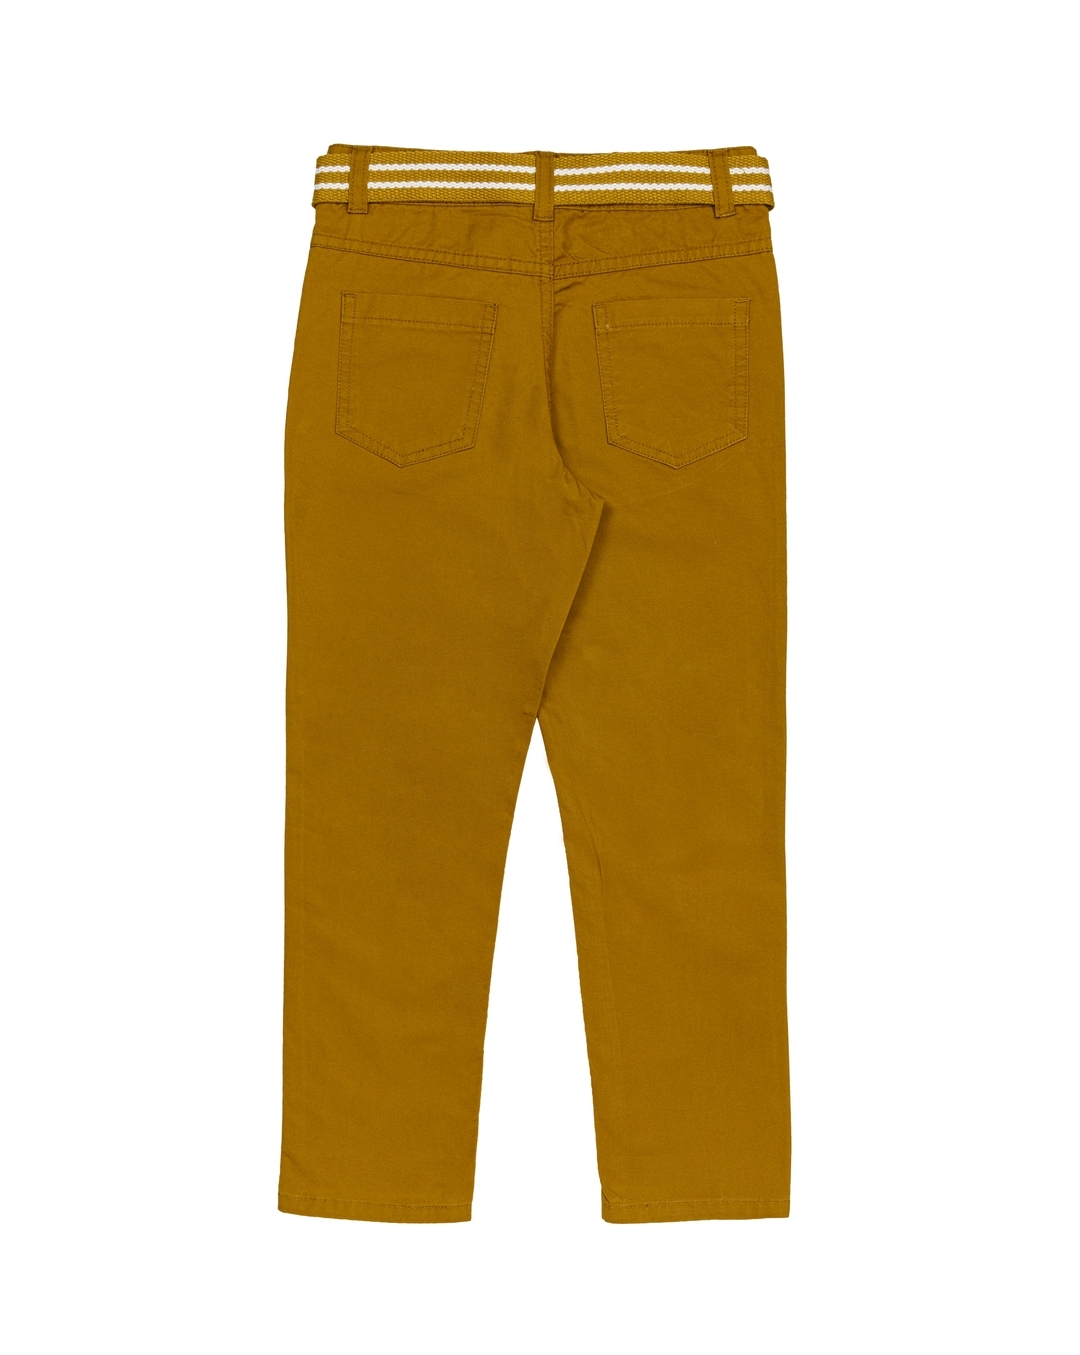 Buy DKGF FASHION Boys Yellow & White Shirt With Trousers - Clothing Set for  Boys 18130150 | Myntra